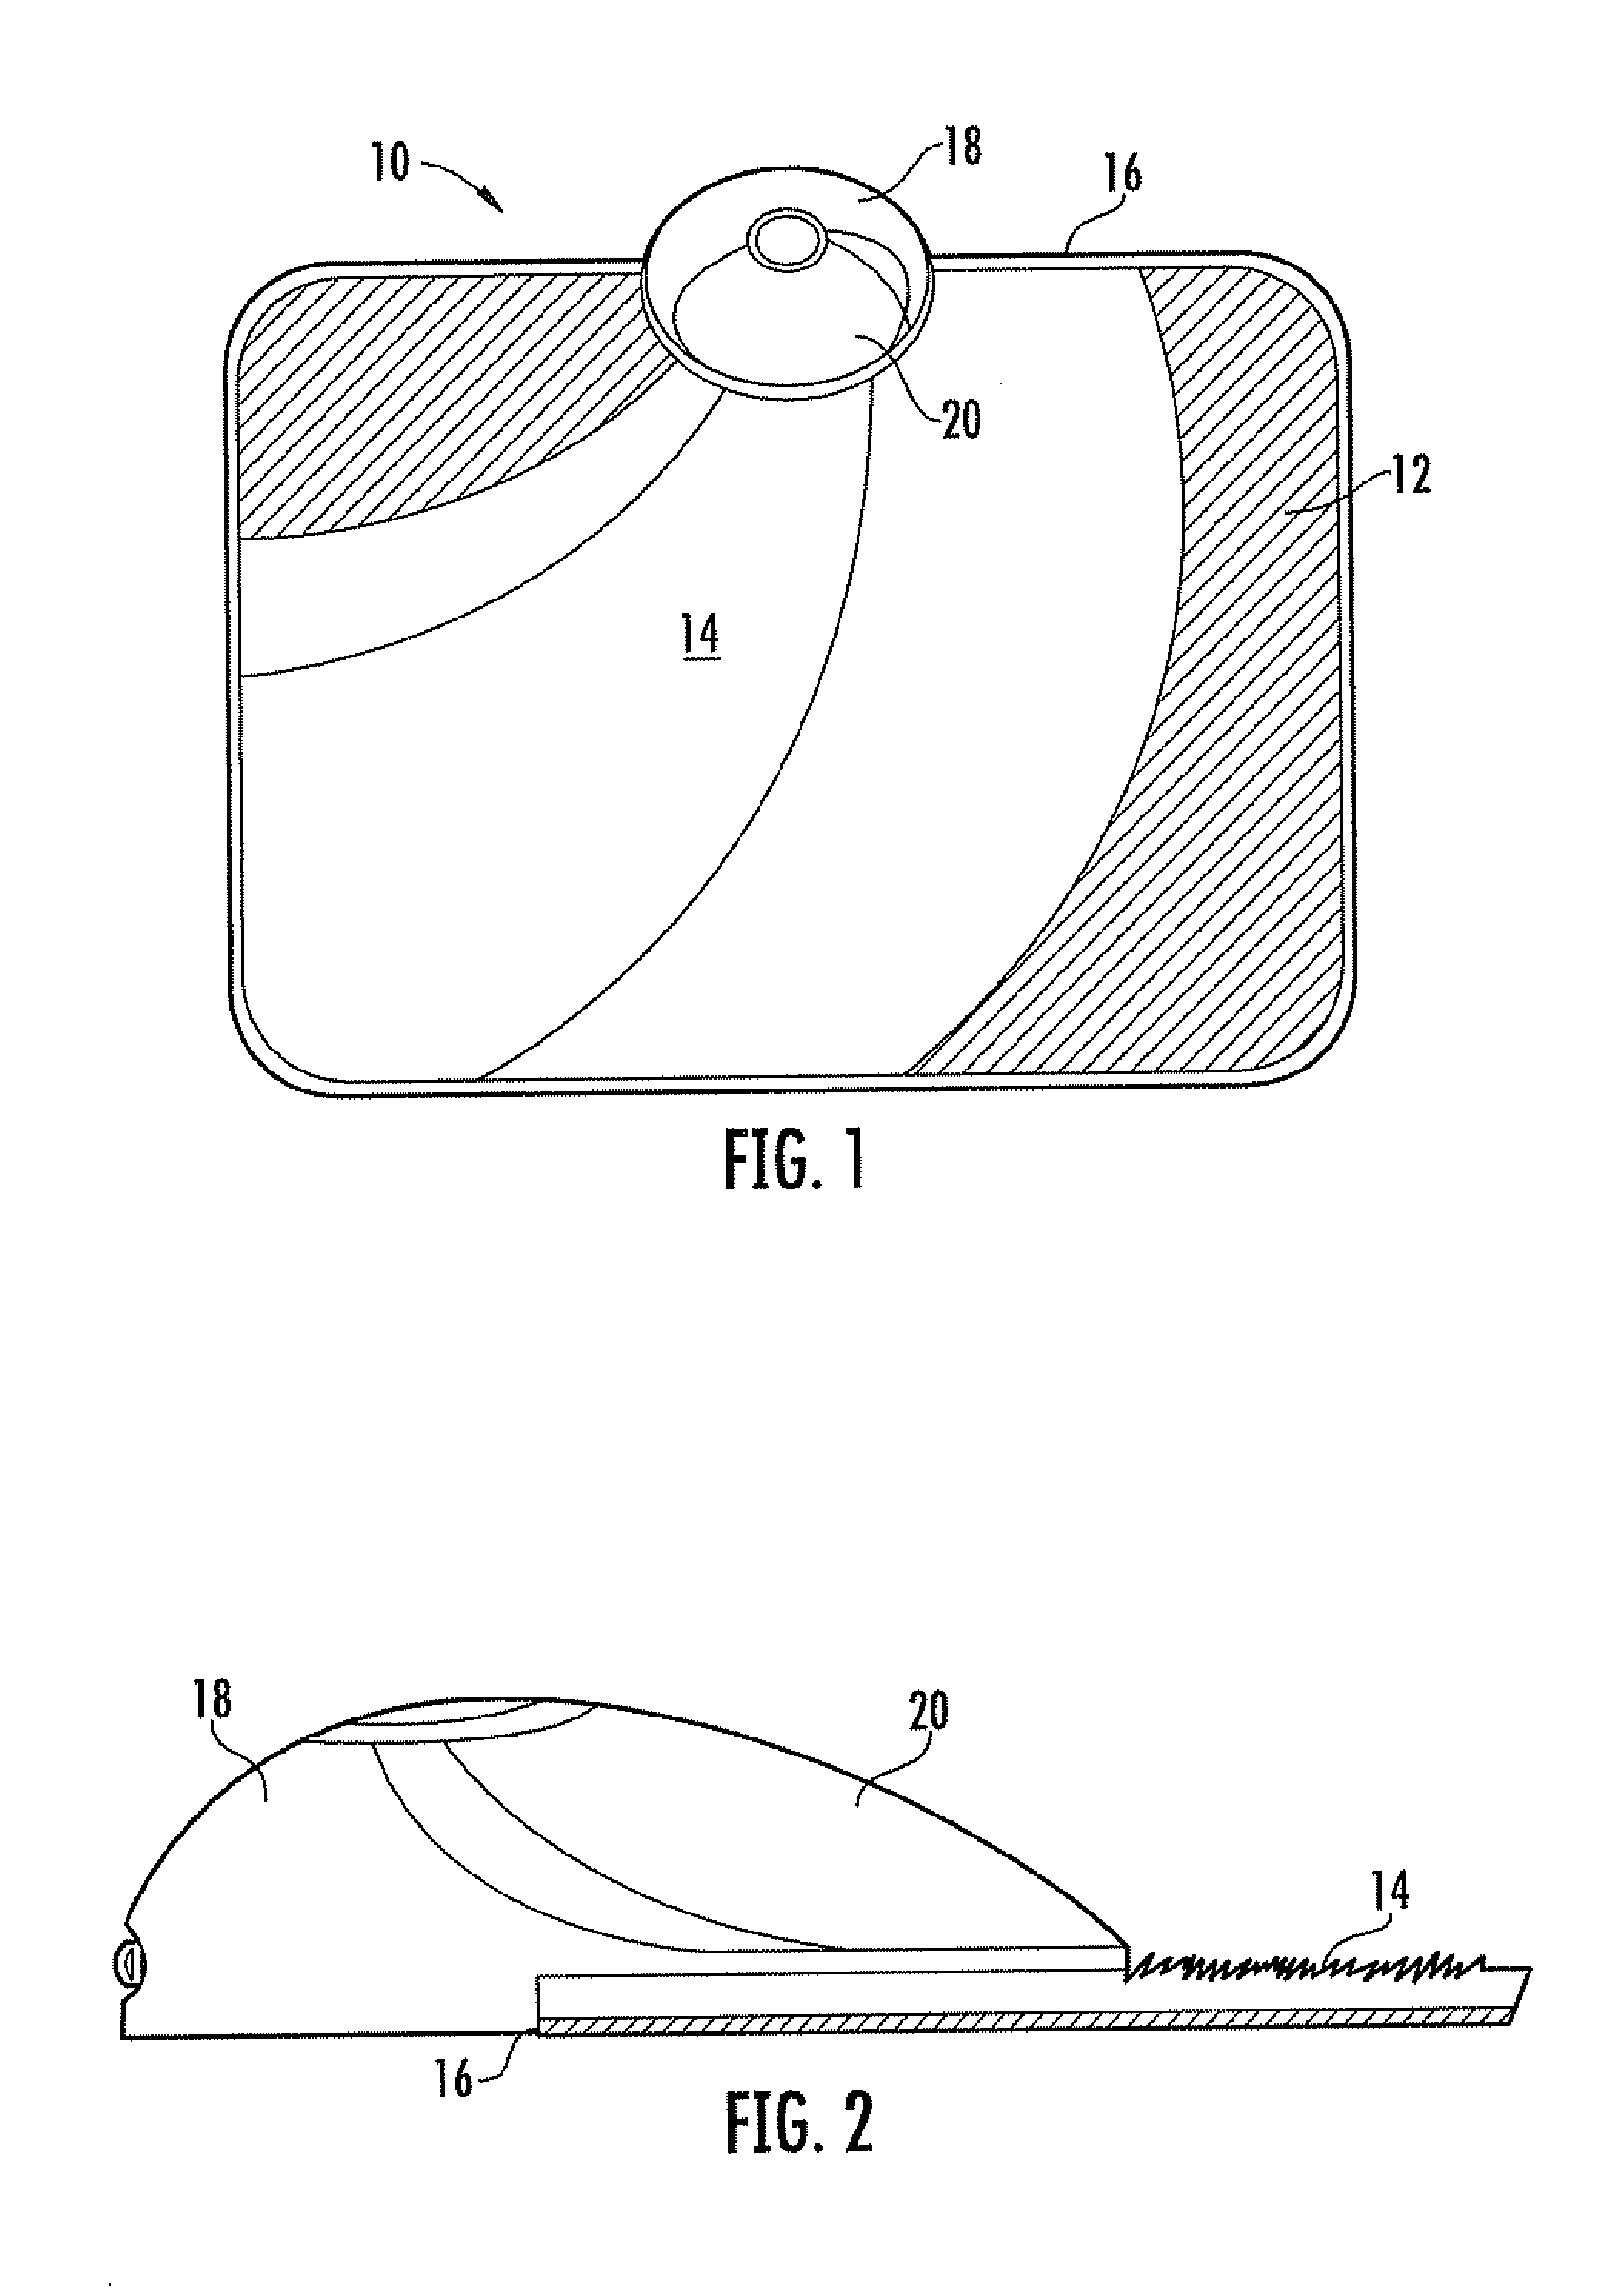 Lighting activation systems and methods